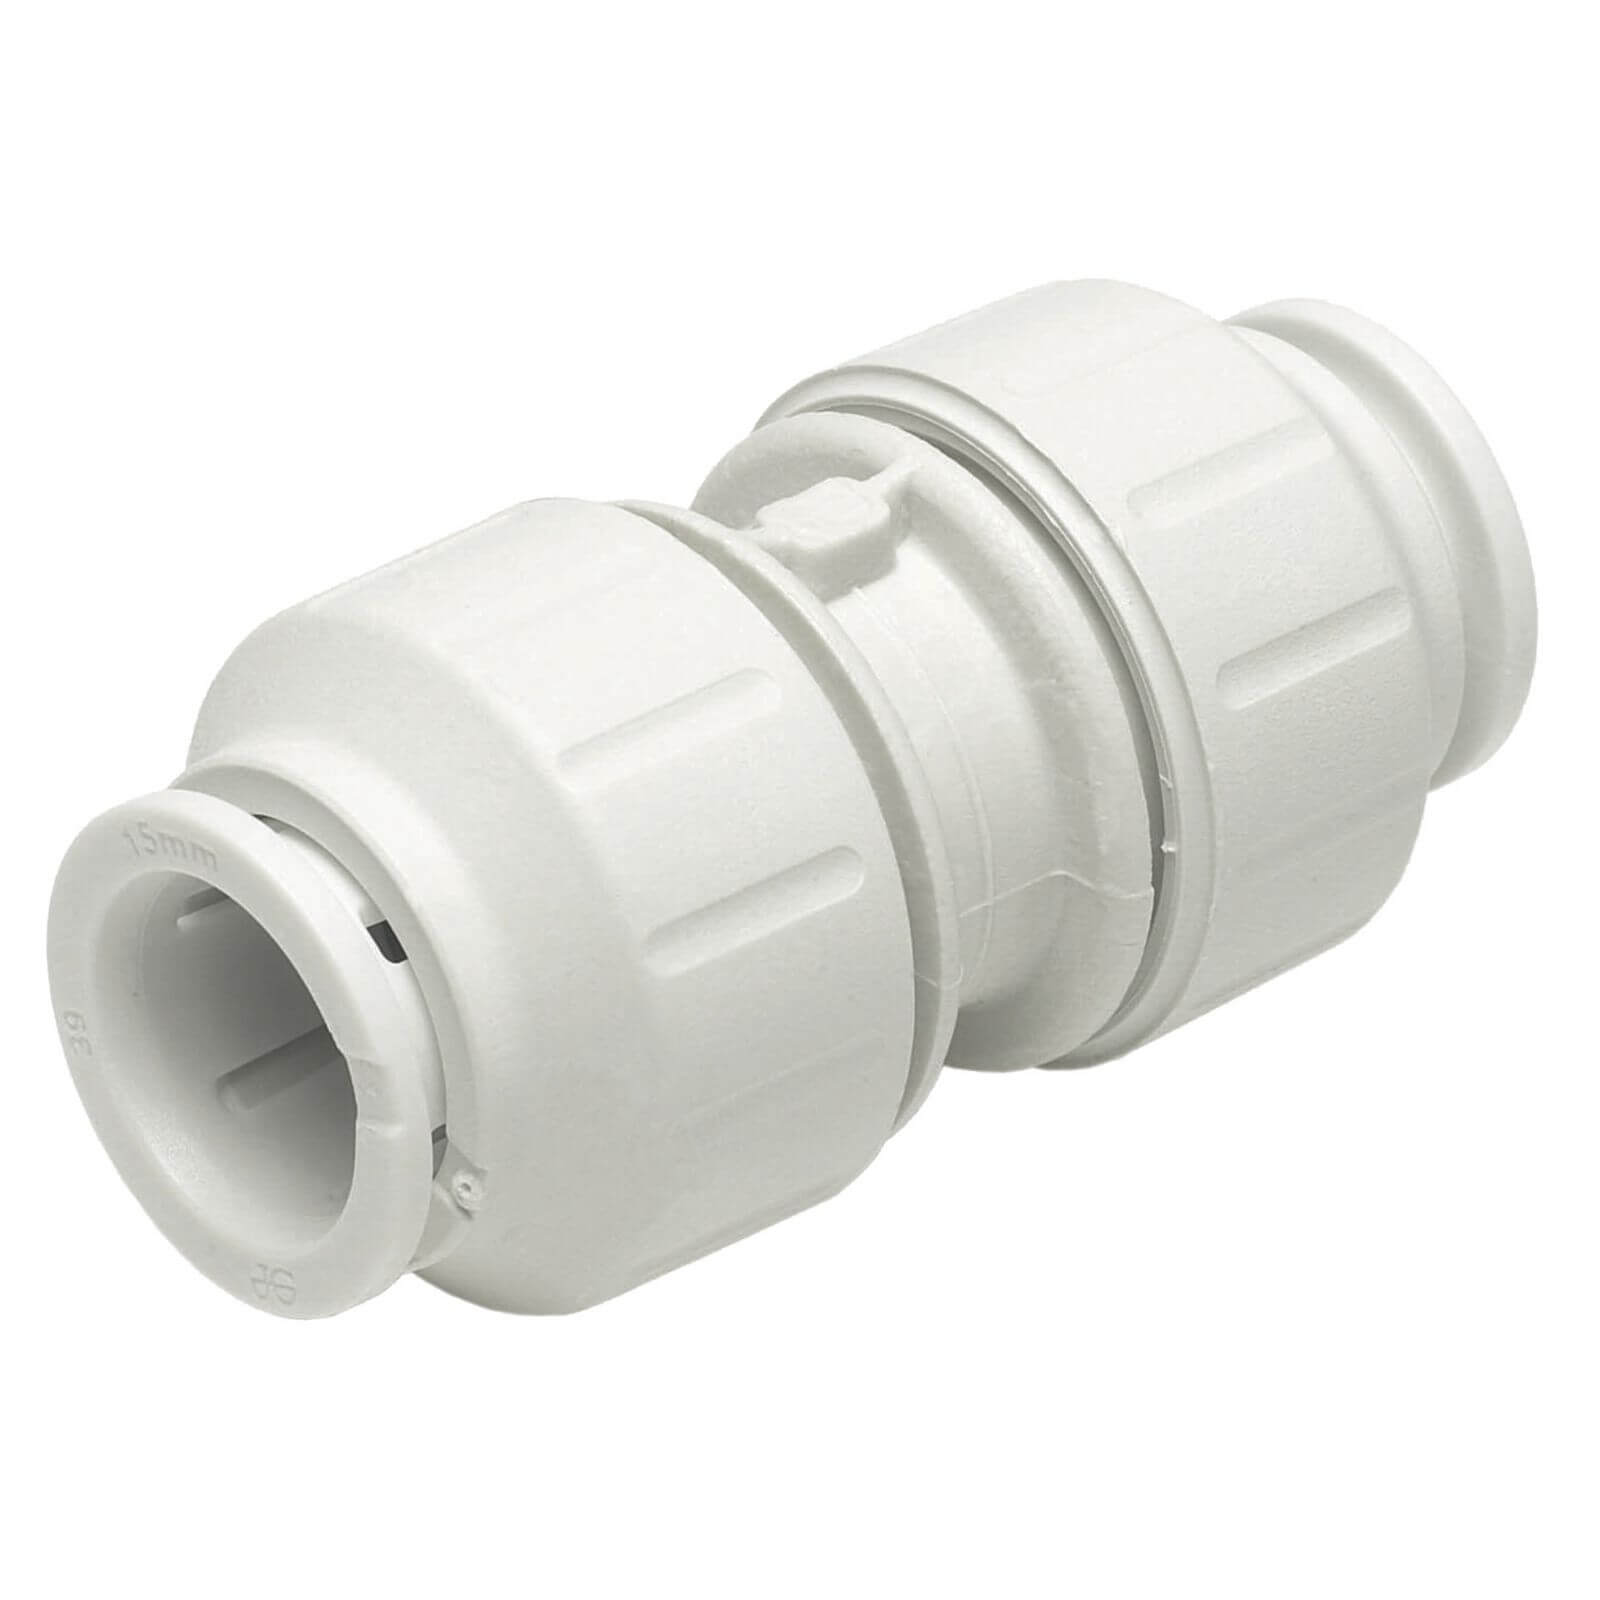 Photo of Jg Speedfit Straight Connector - 15mm - 10 Pack